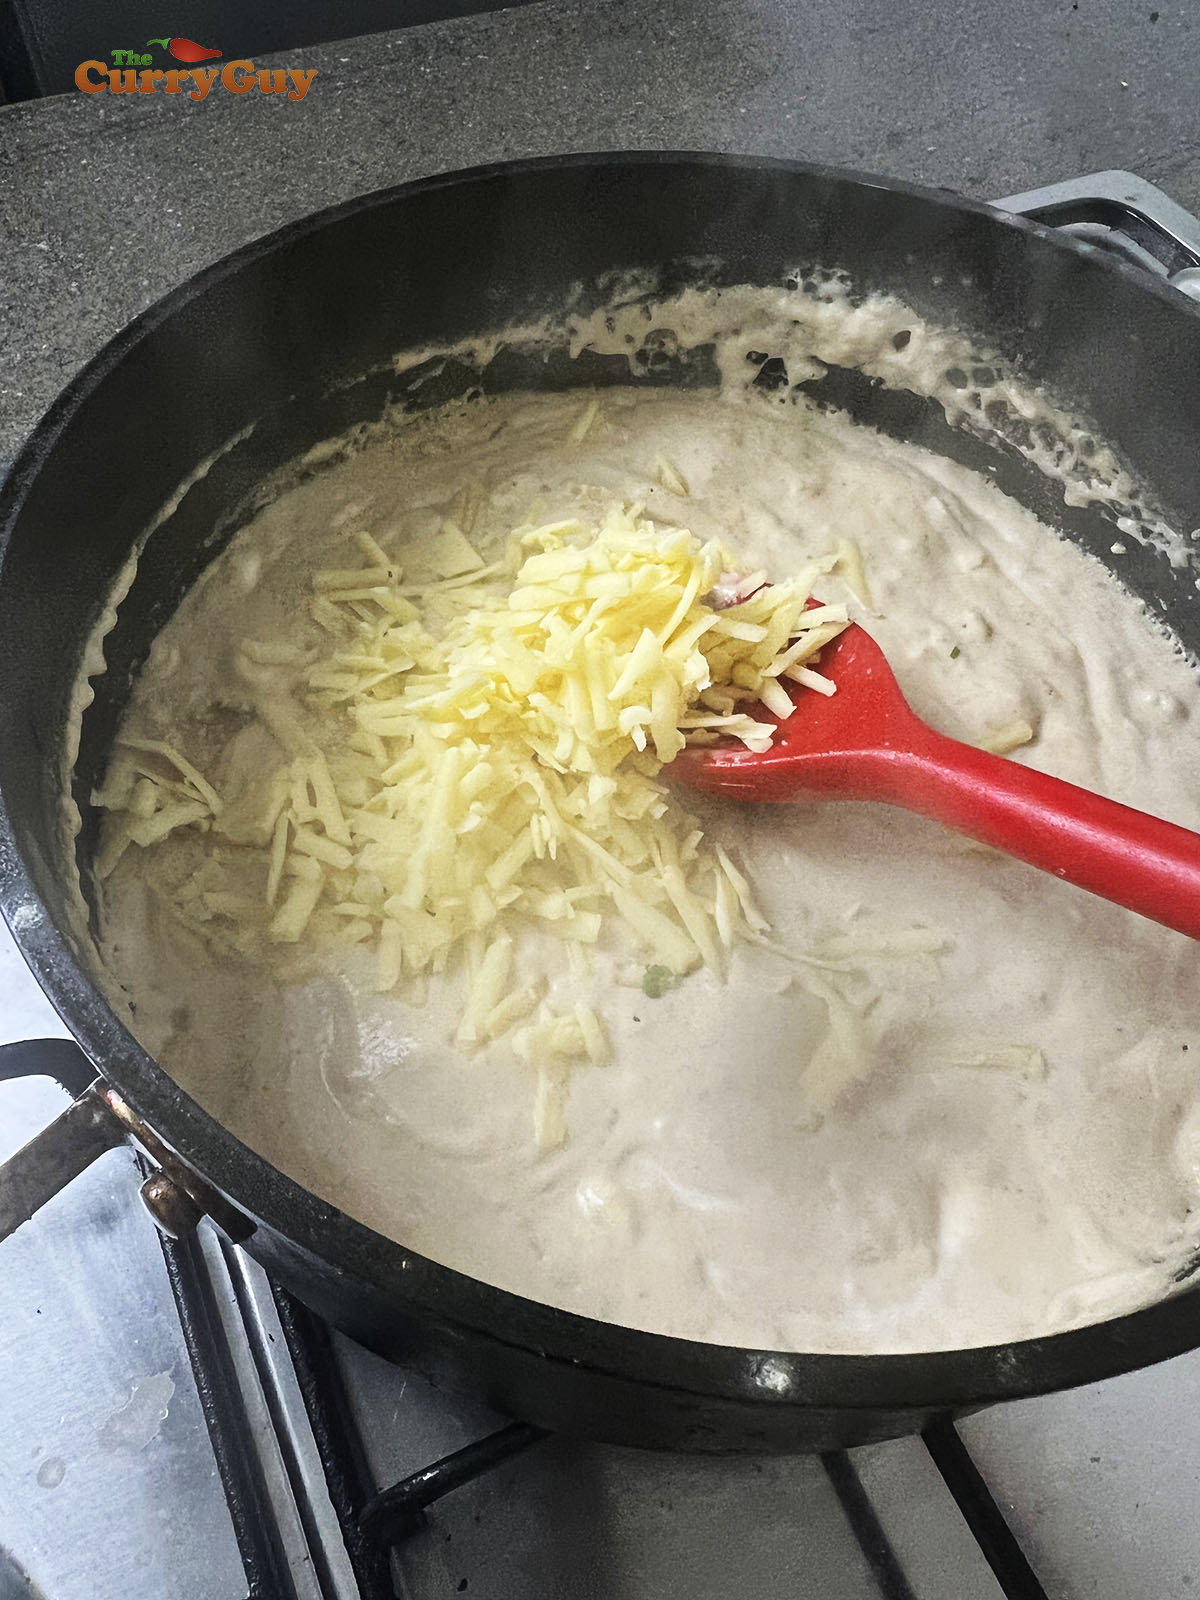 Adding grated cheese to the sauce